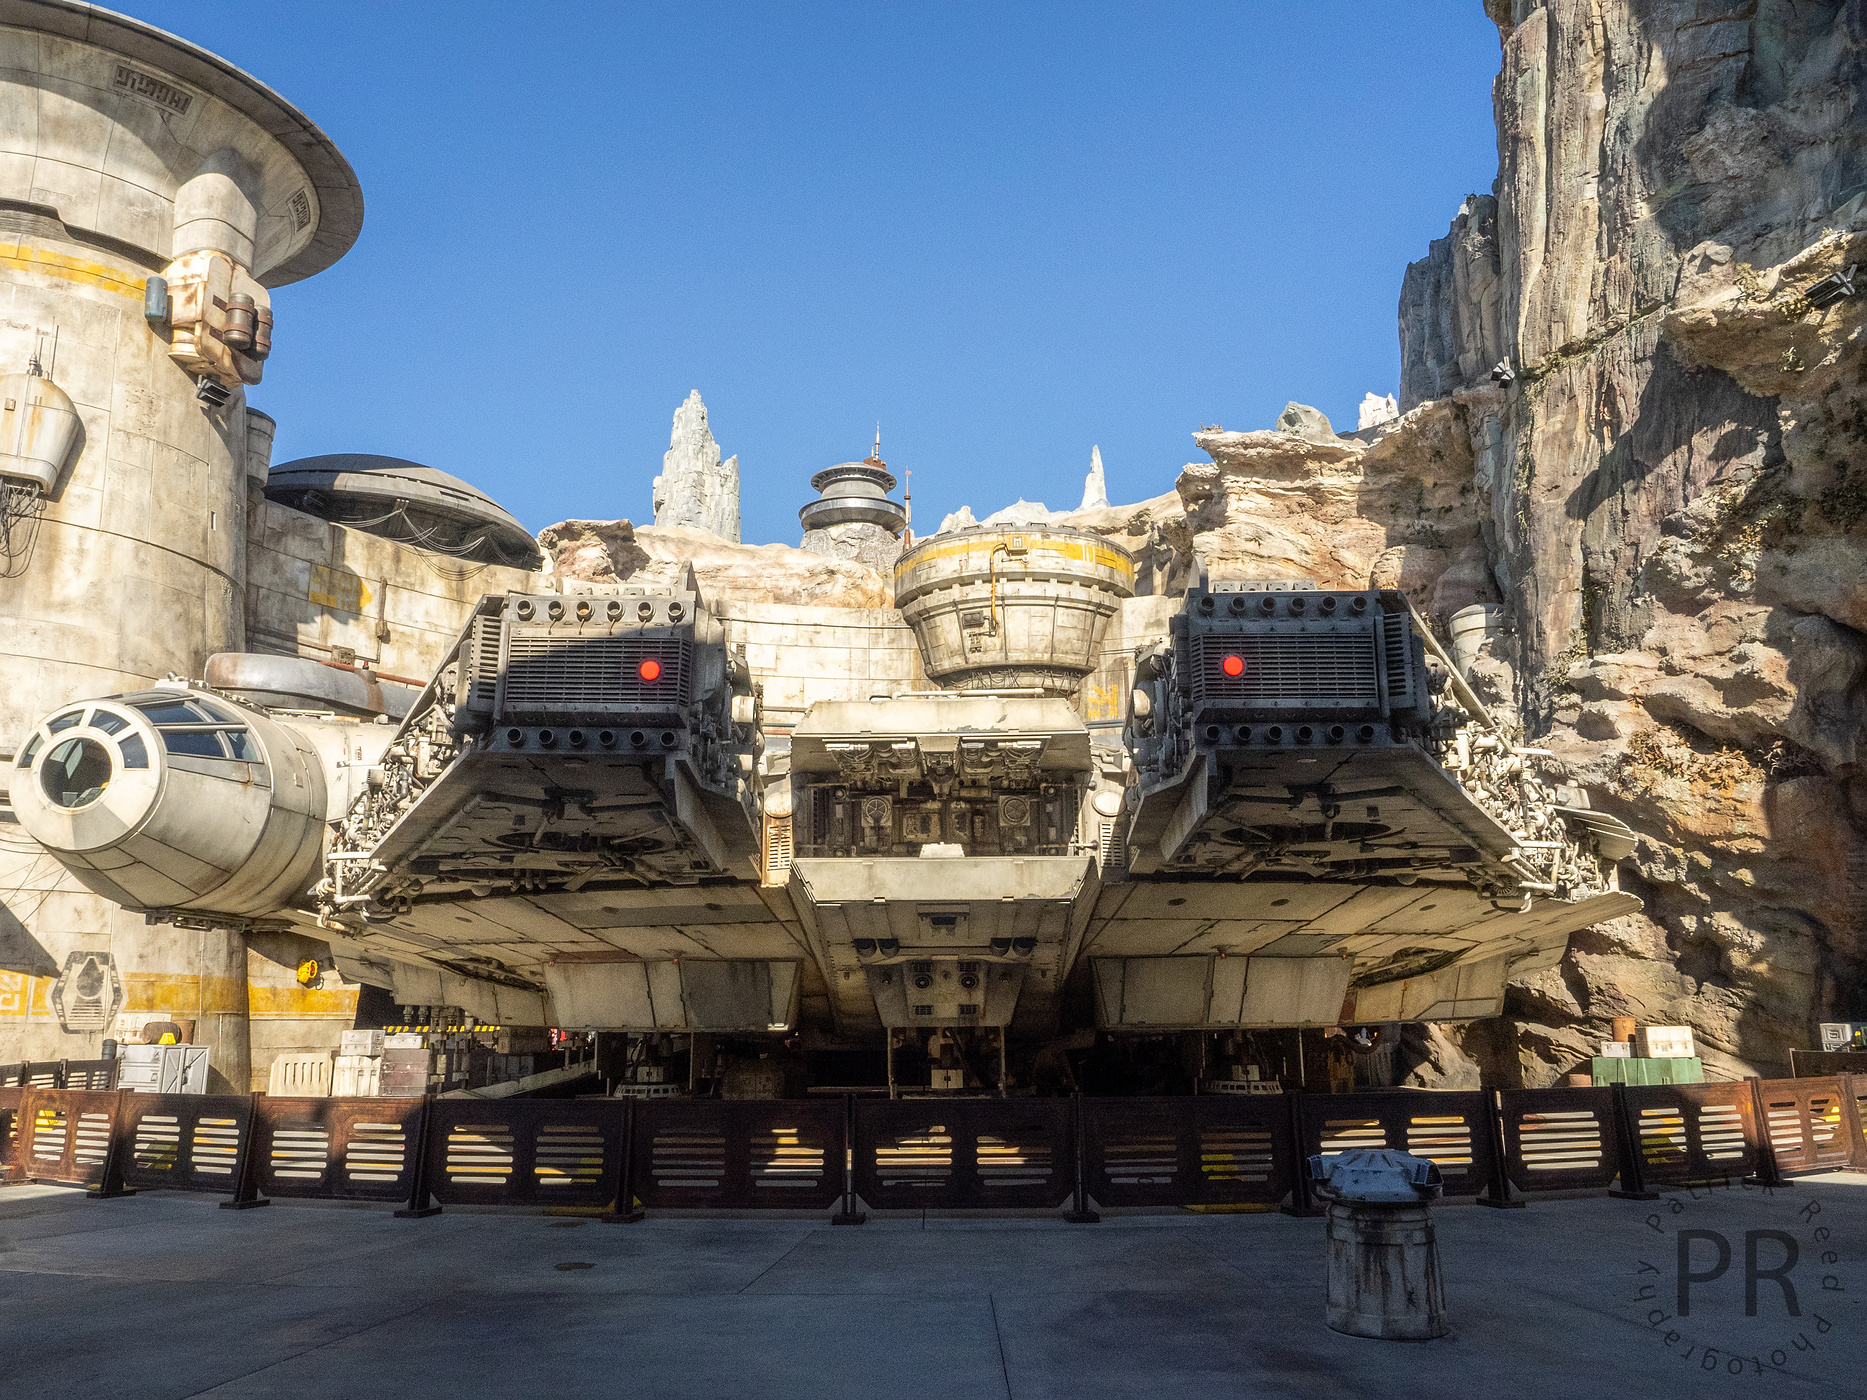 Immerse Yourself in Wonders of Galaxy’s Edge Through the Art of Photography